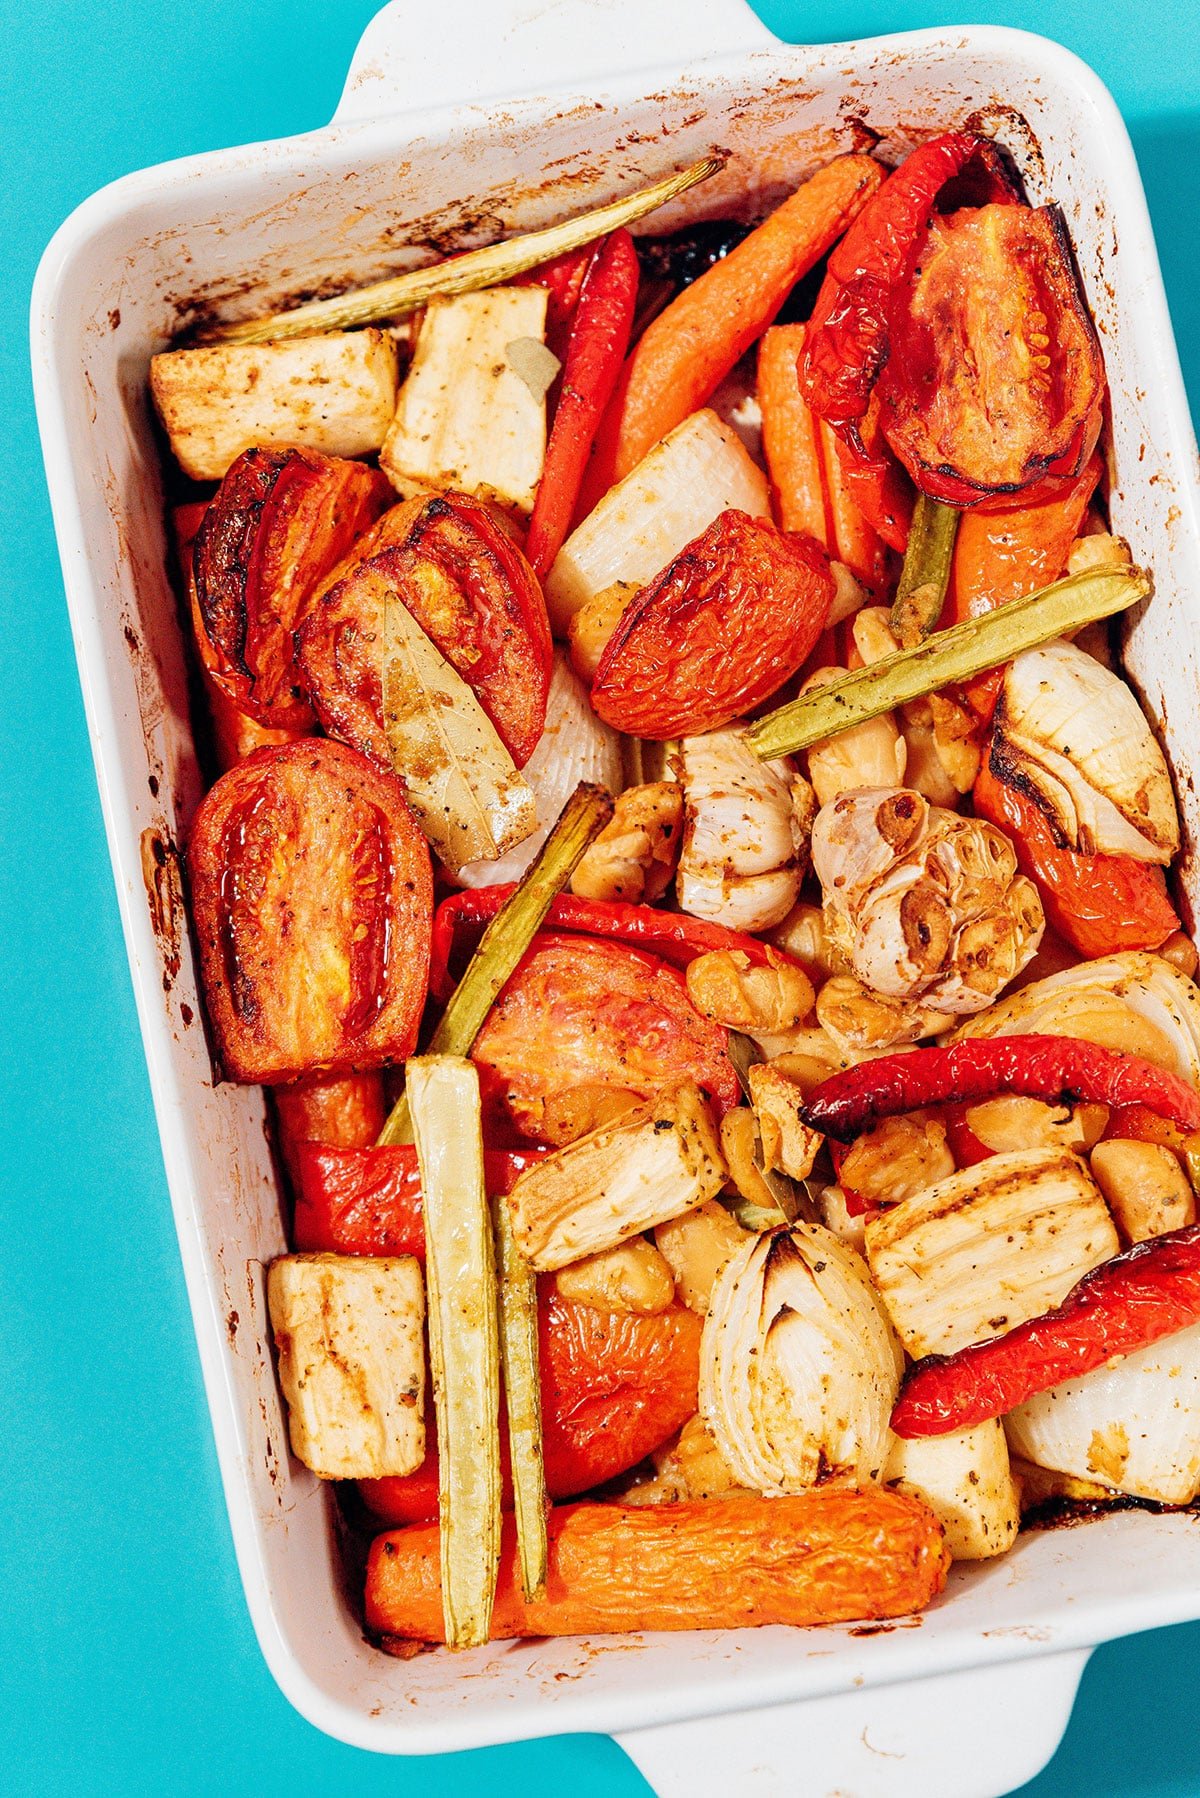 Roasted vegetables in a pan.